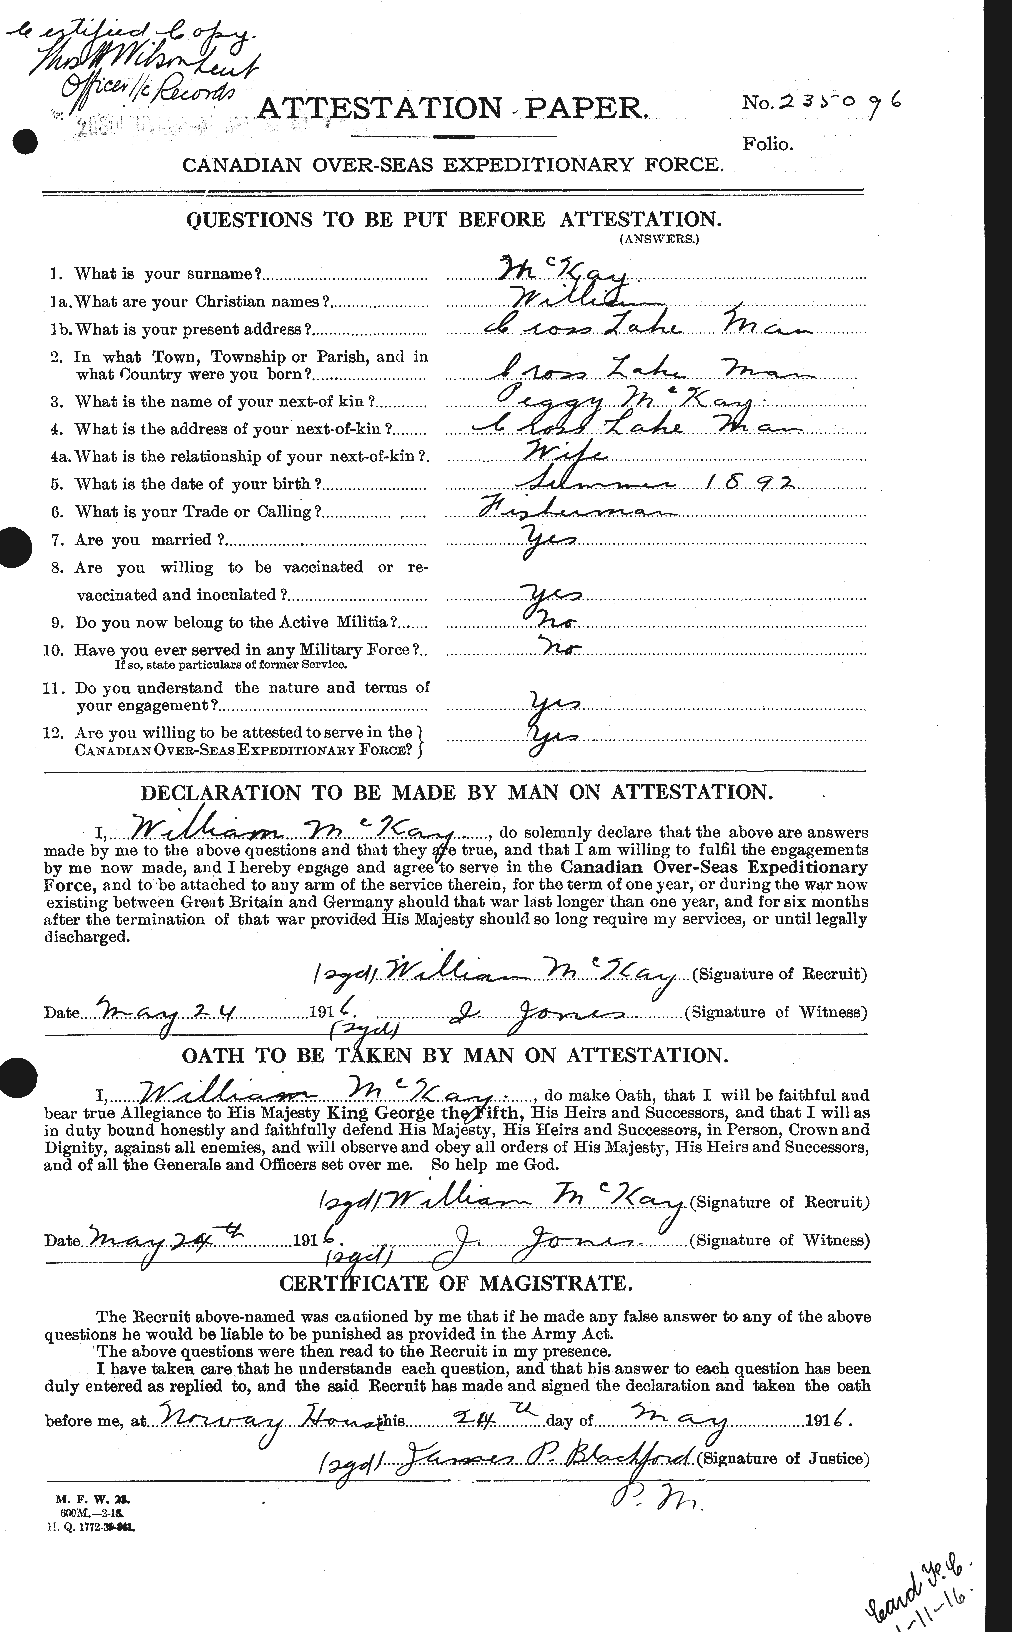 Personnel Records of the First World War - CEF 530210a